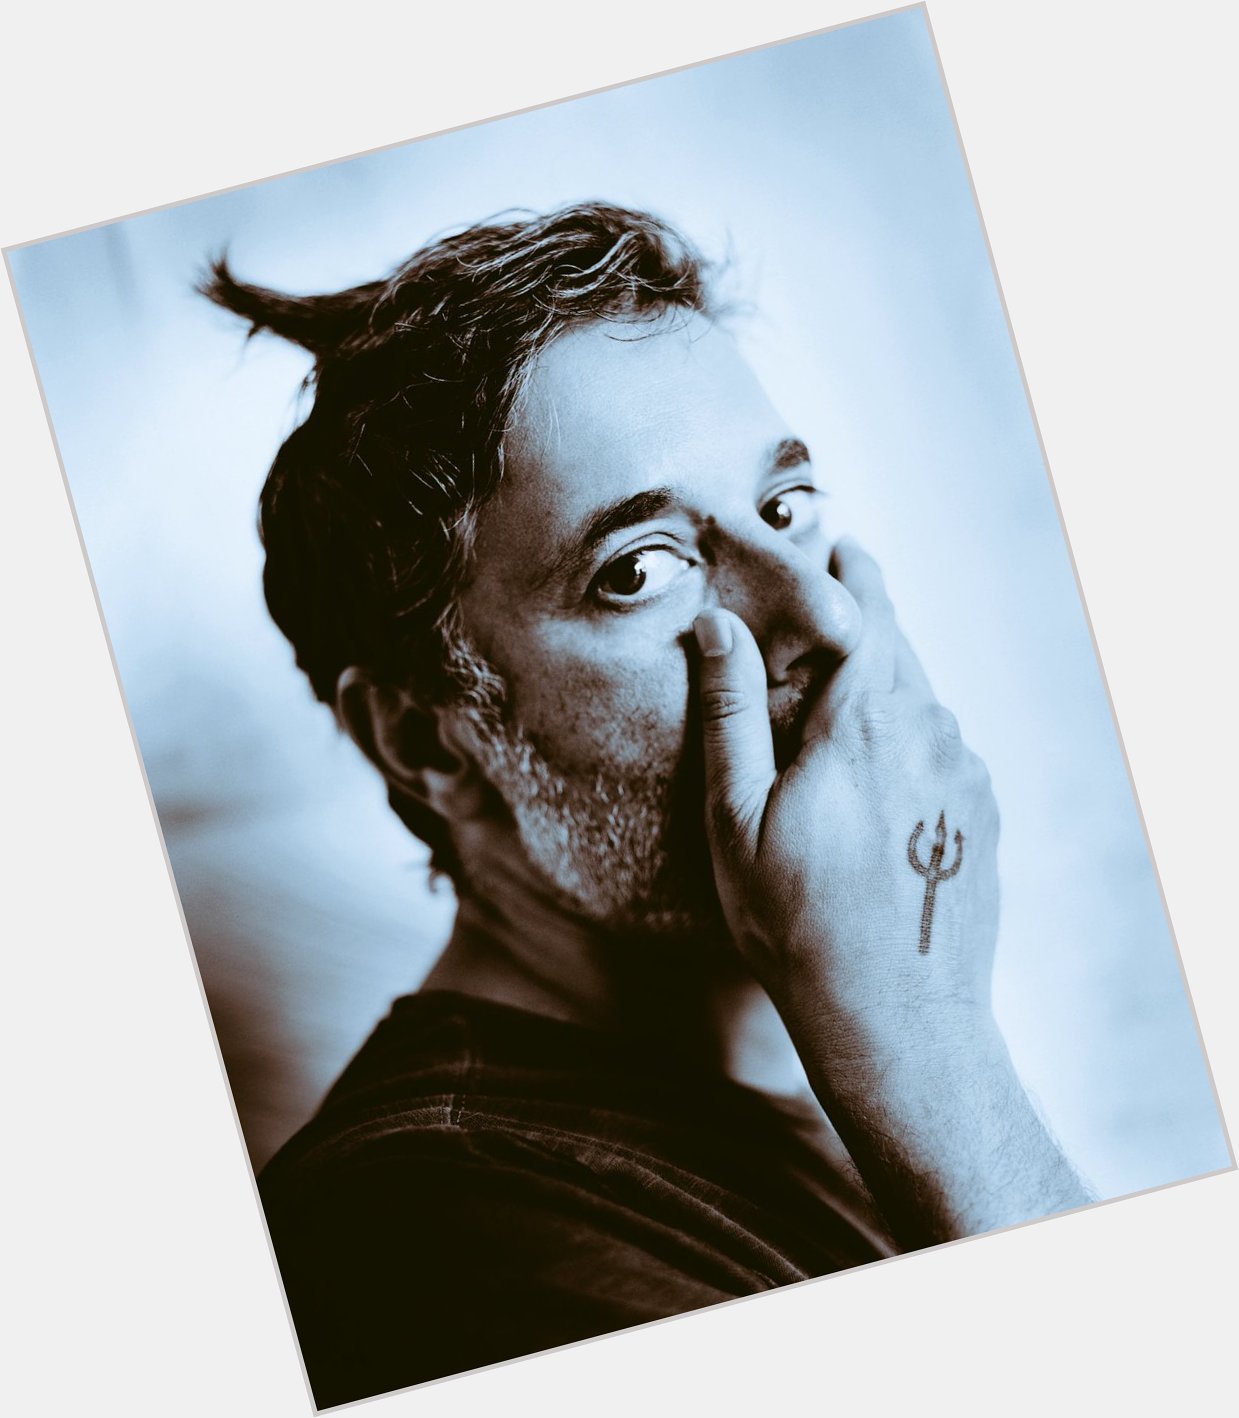 Wishing a happy 45th birthday to a true auteur and one of my favourite directors, Harmony Korine. 